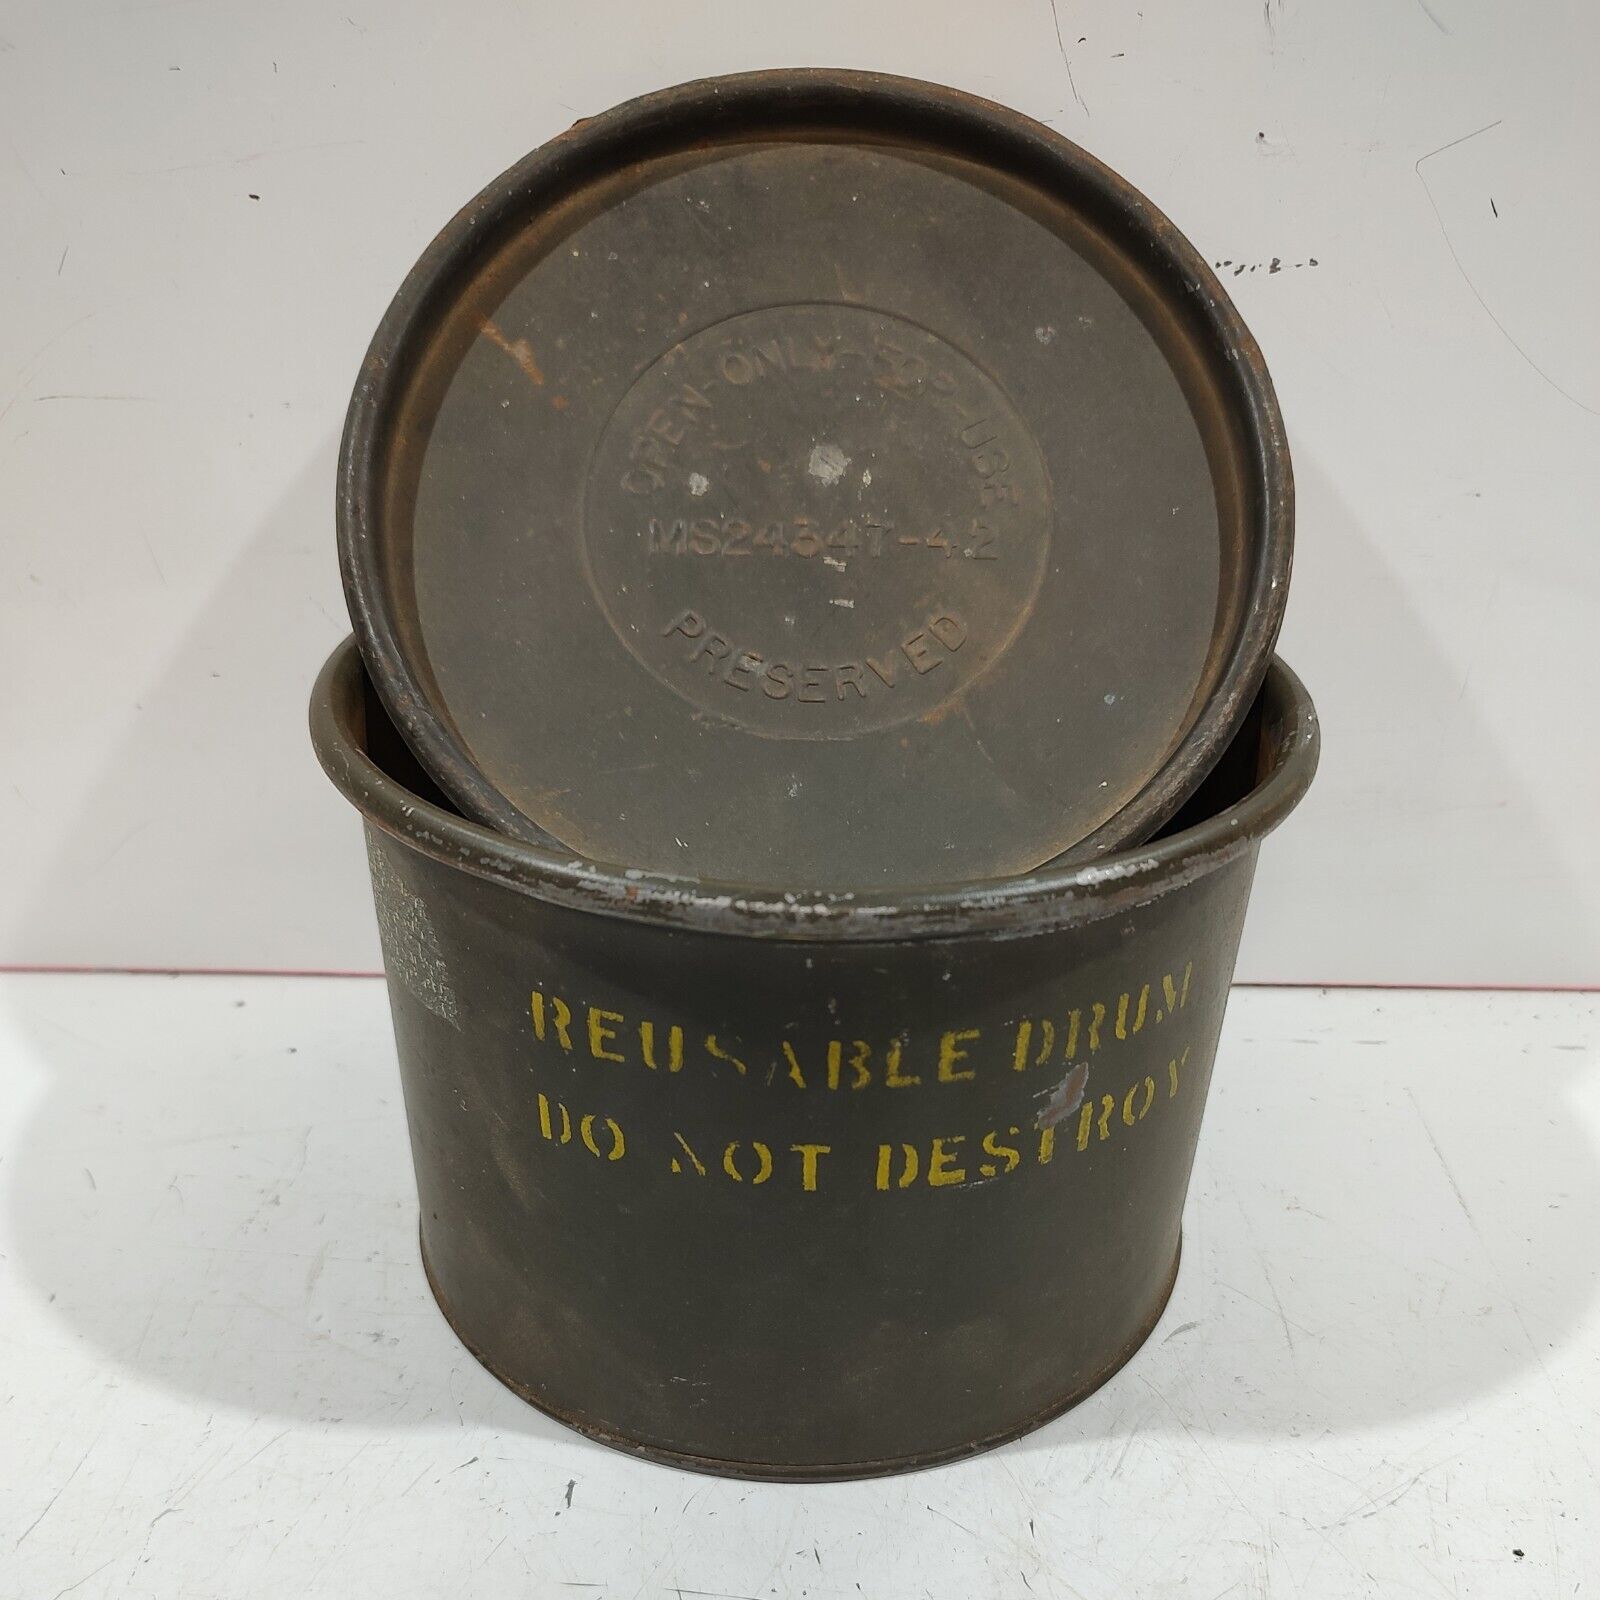 Vintage 1958 US Military Reusable Drum Metal Container Army Green Jebco Inc. Can